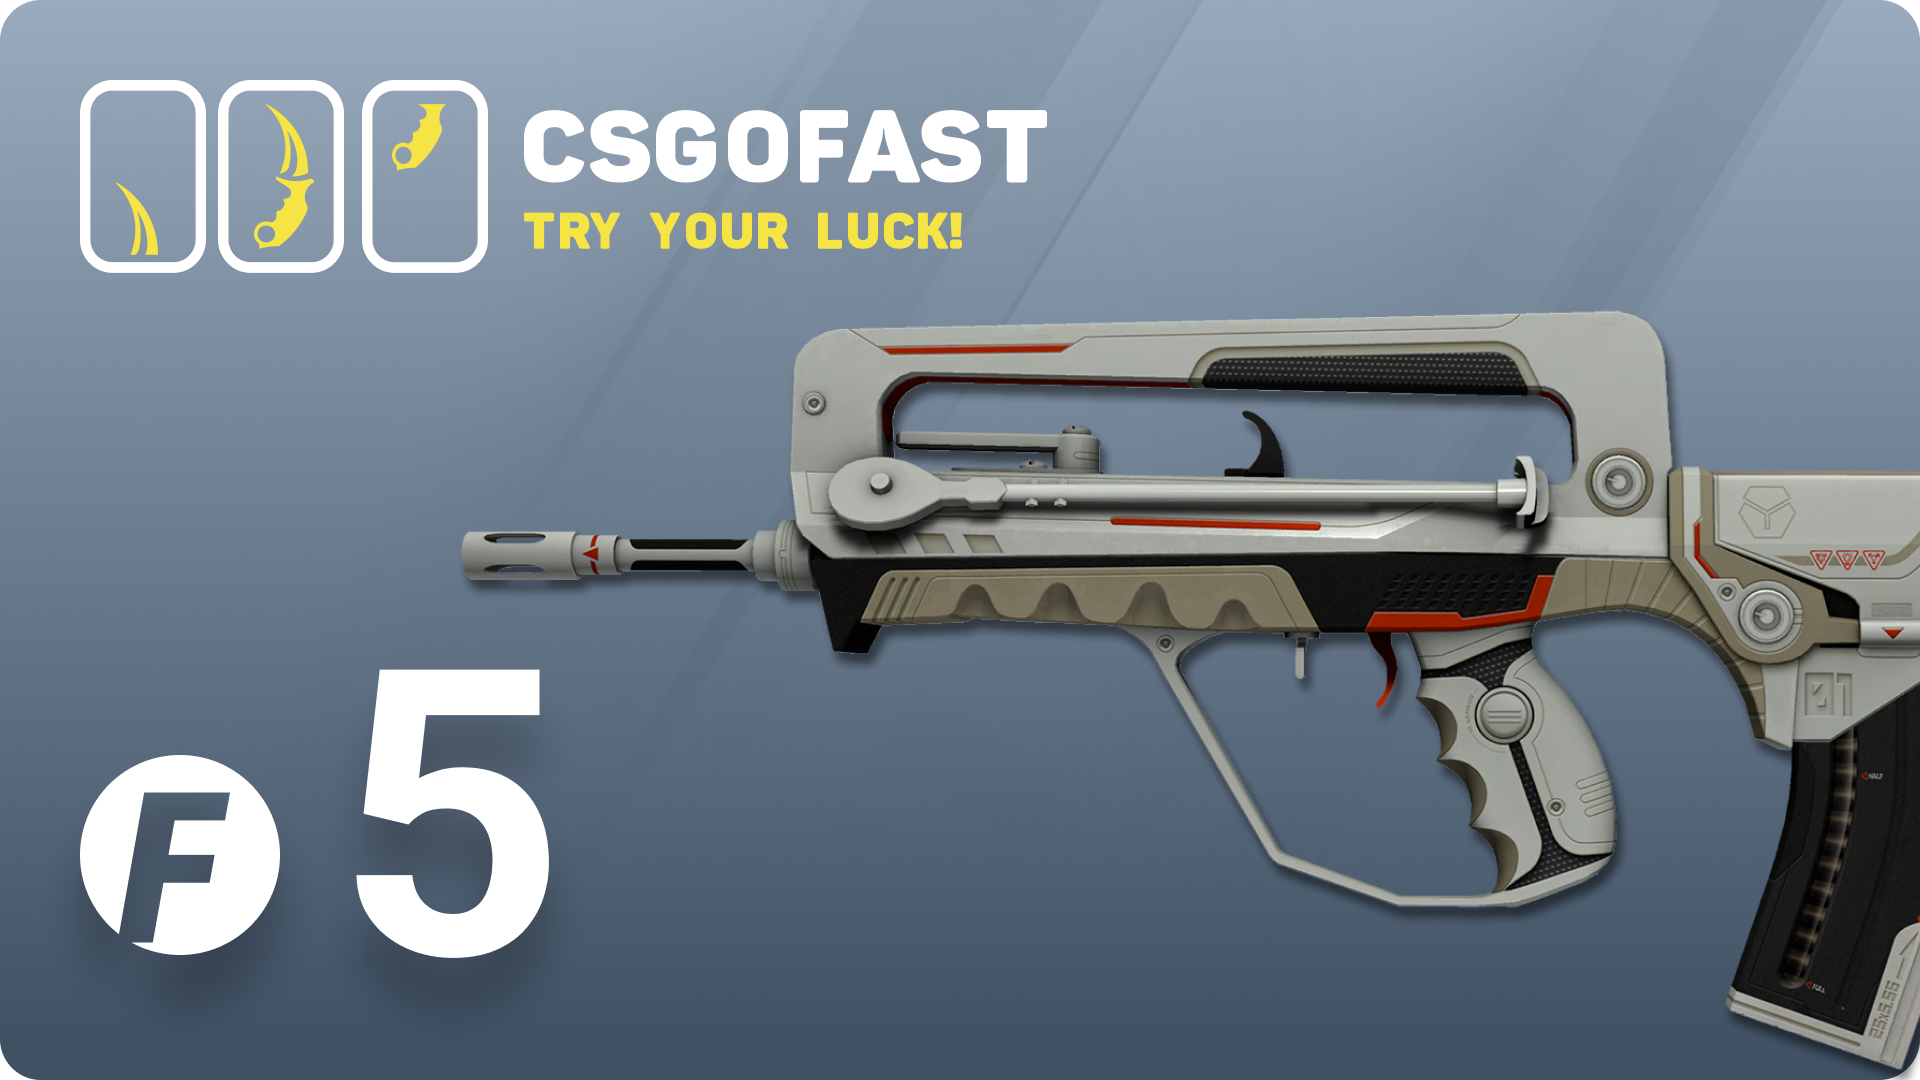 CSGOFAST 5 Fast Coins Gift Card [$ 3.63]